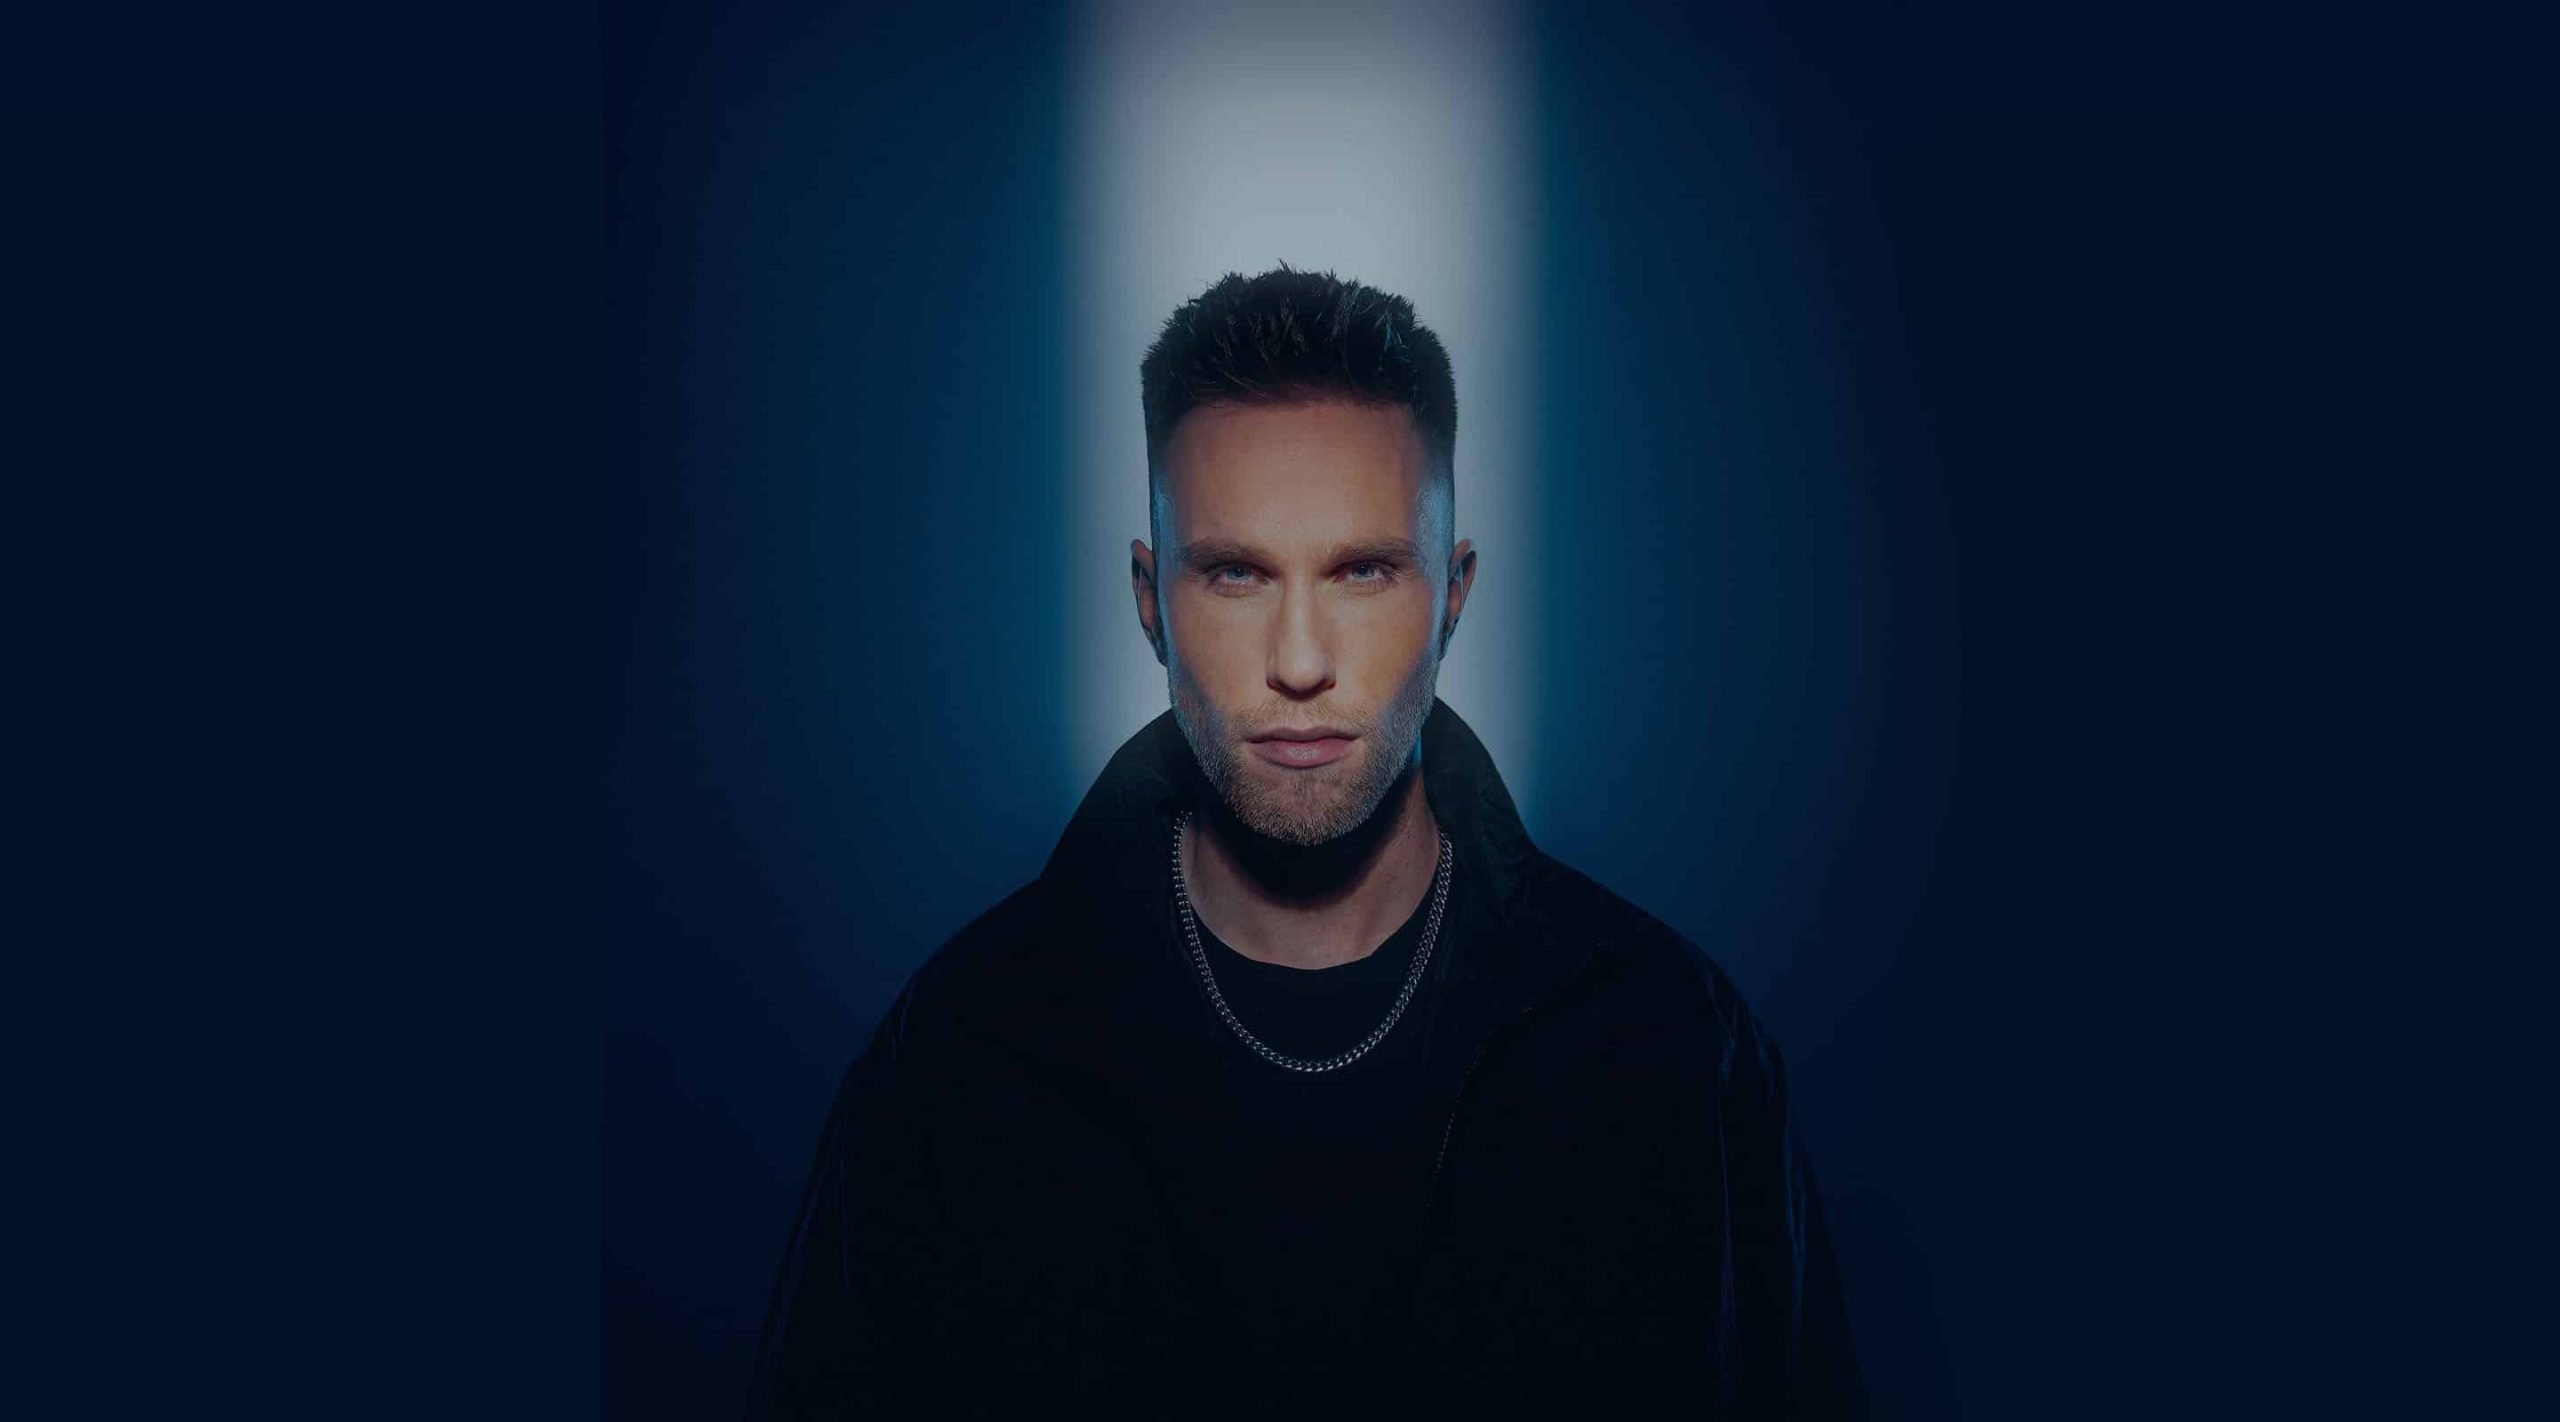 Nicky Romero announces first-ever solo open to close show ‘Nightvision’ at AFAS Live